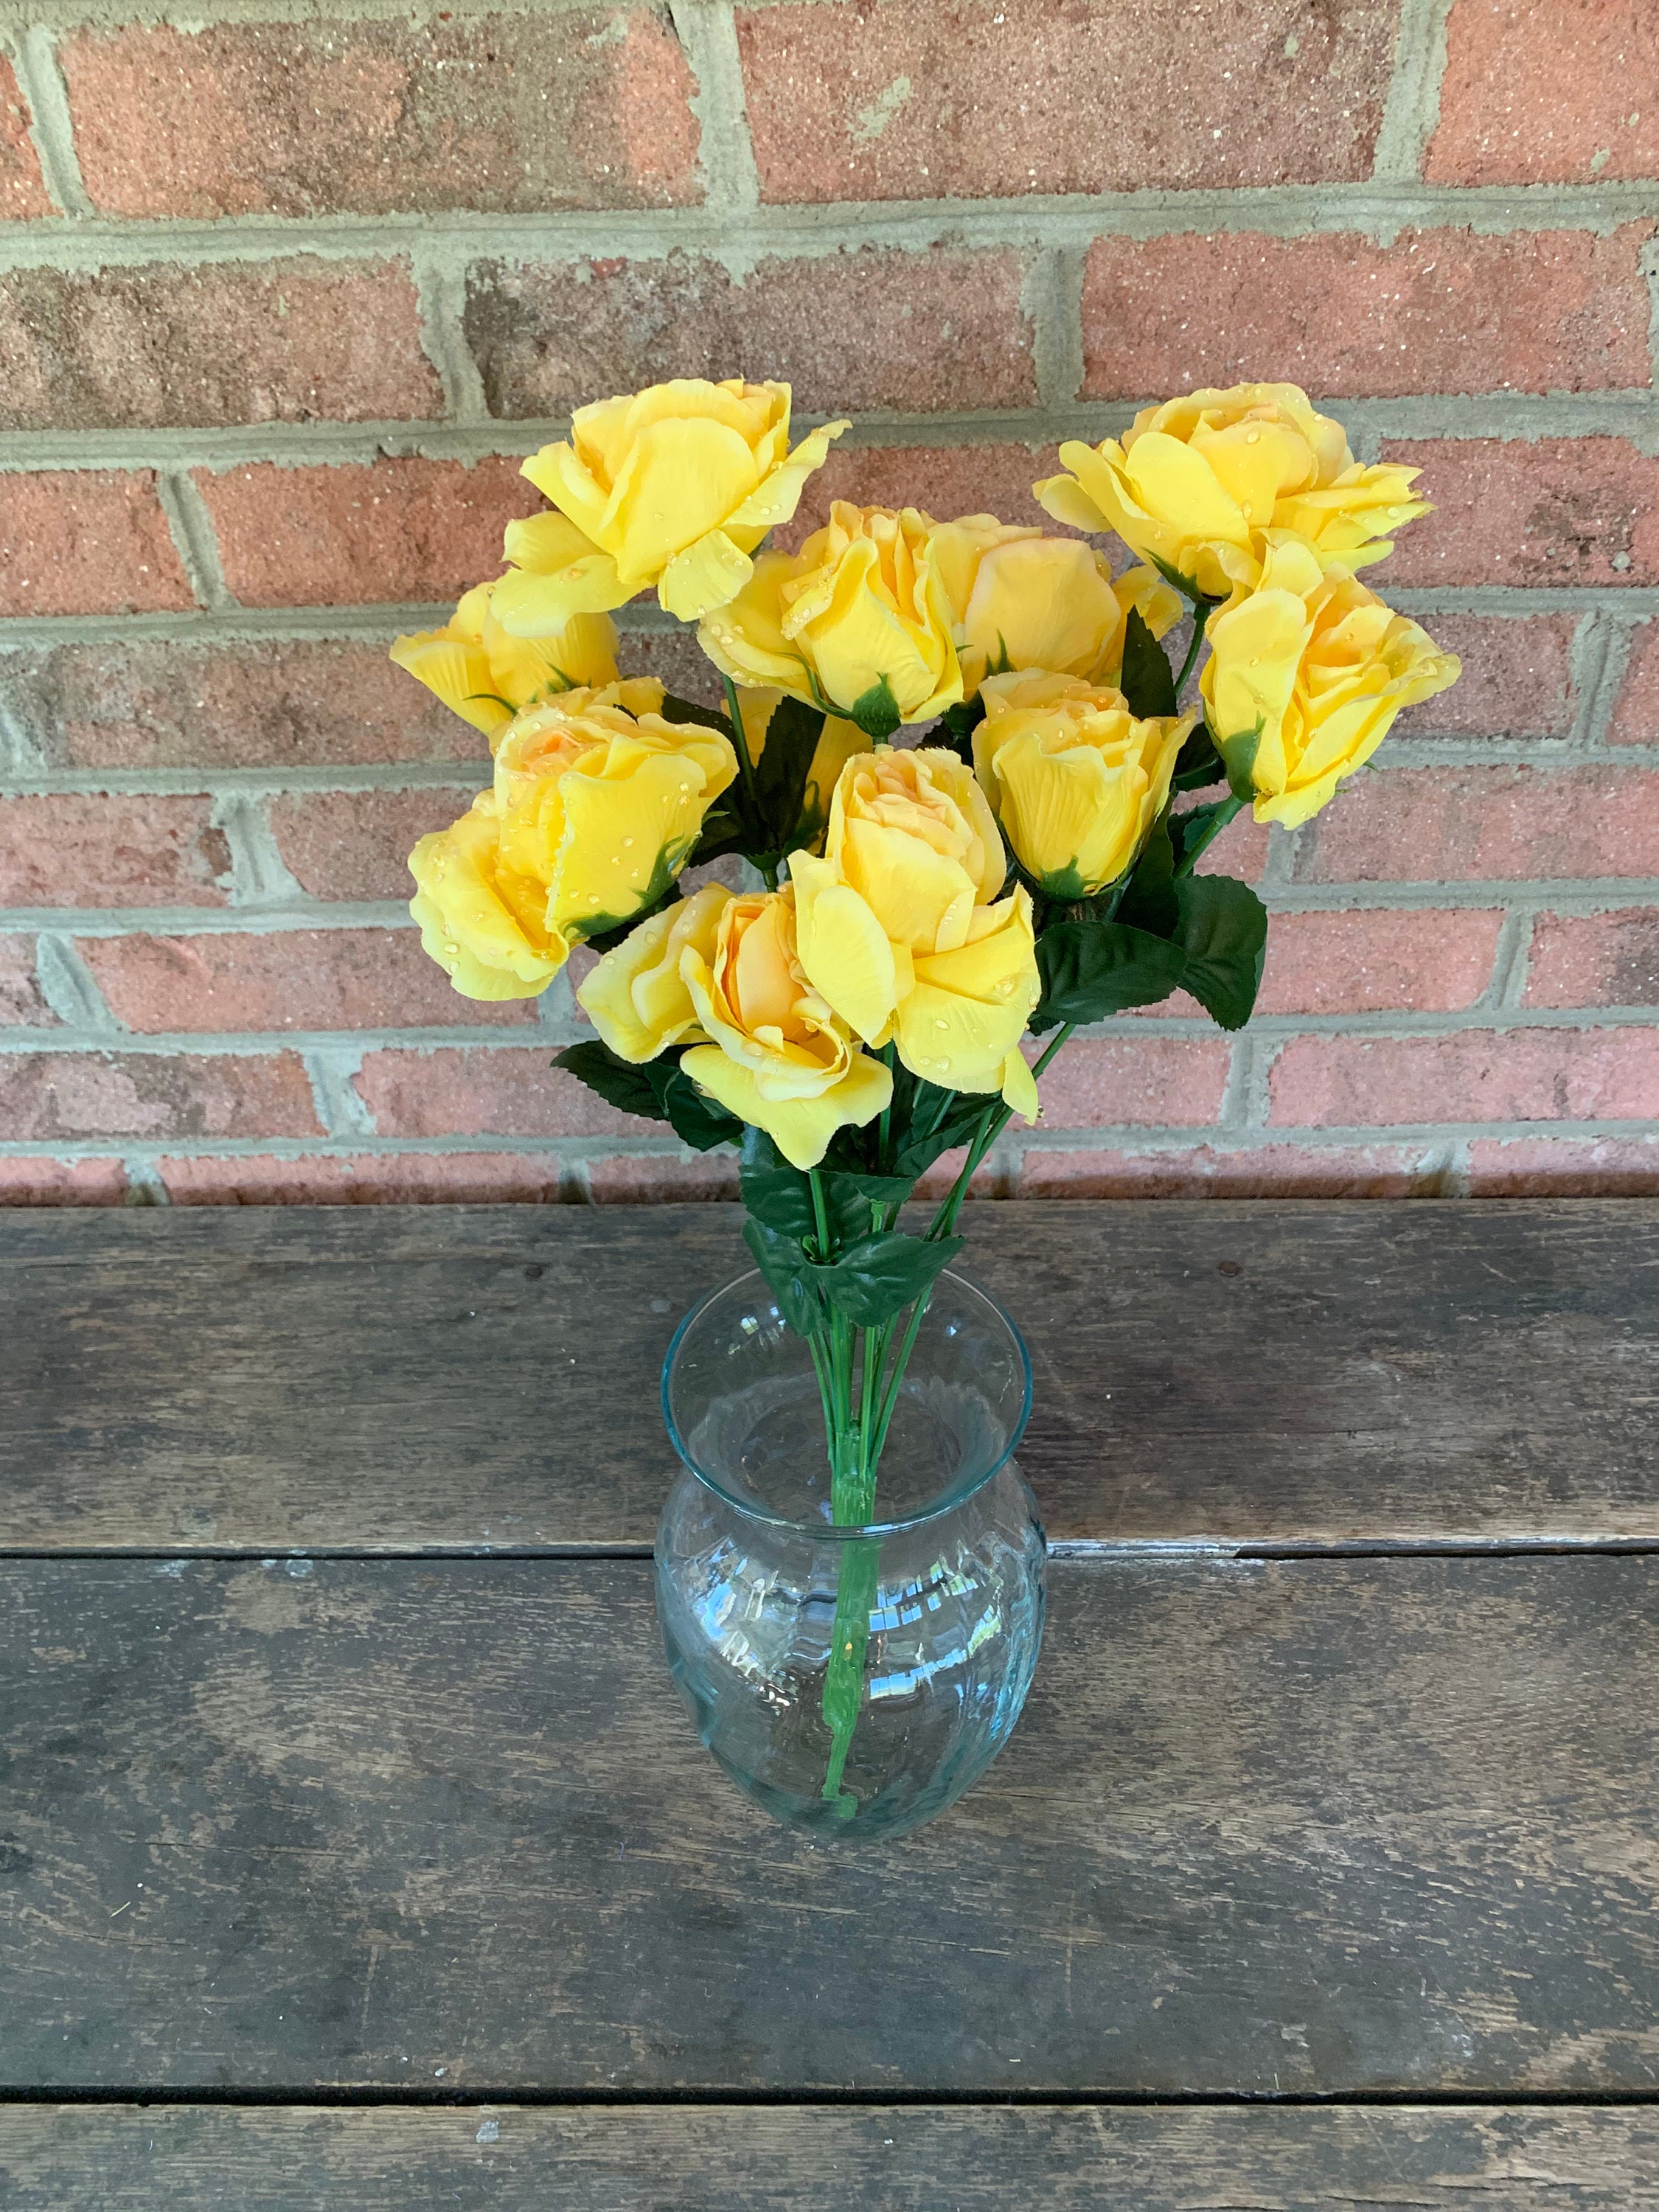 19 Yellow Open Rose Bush X14 With Water Droplets Artificial Fake